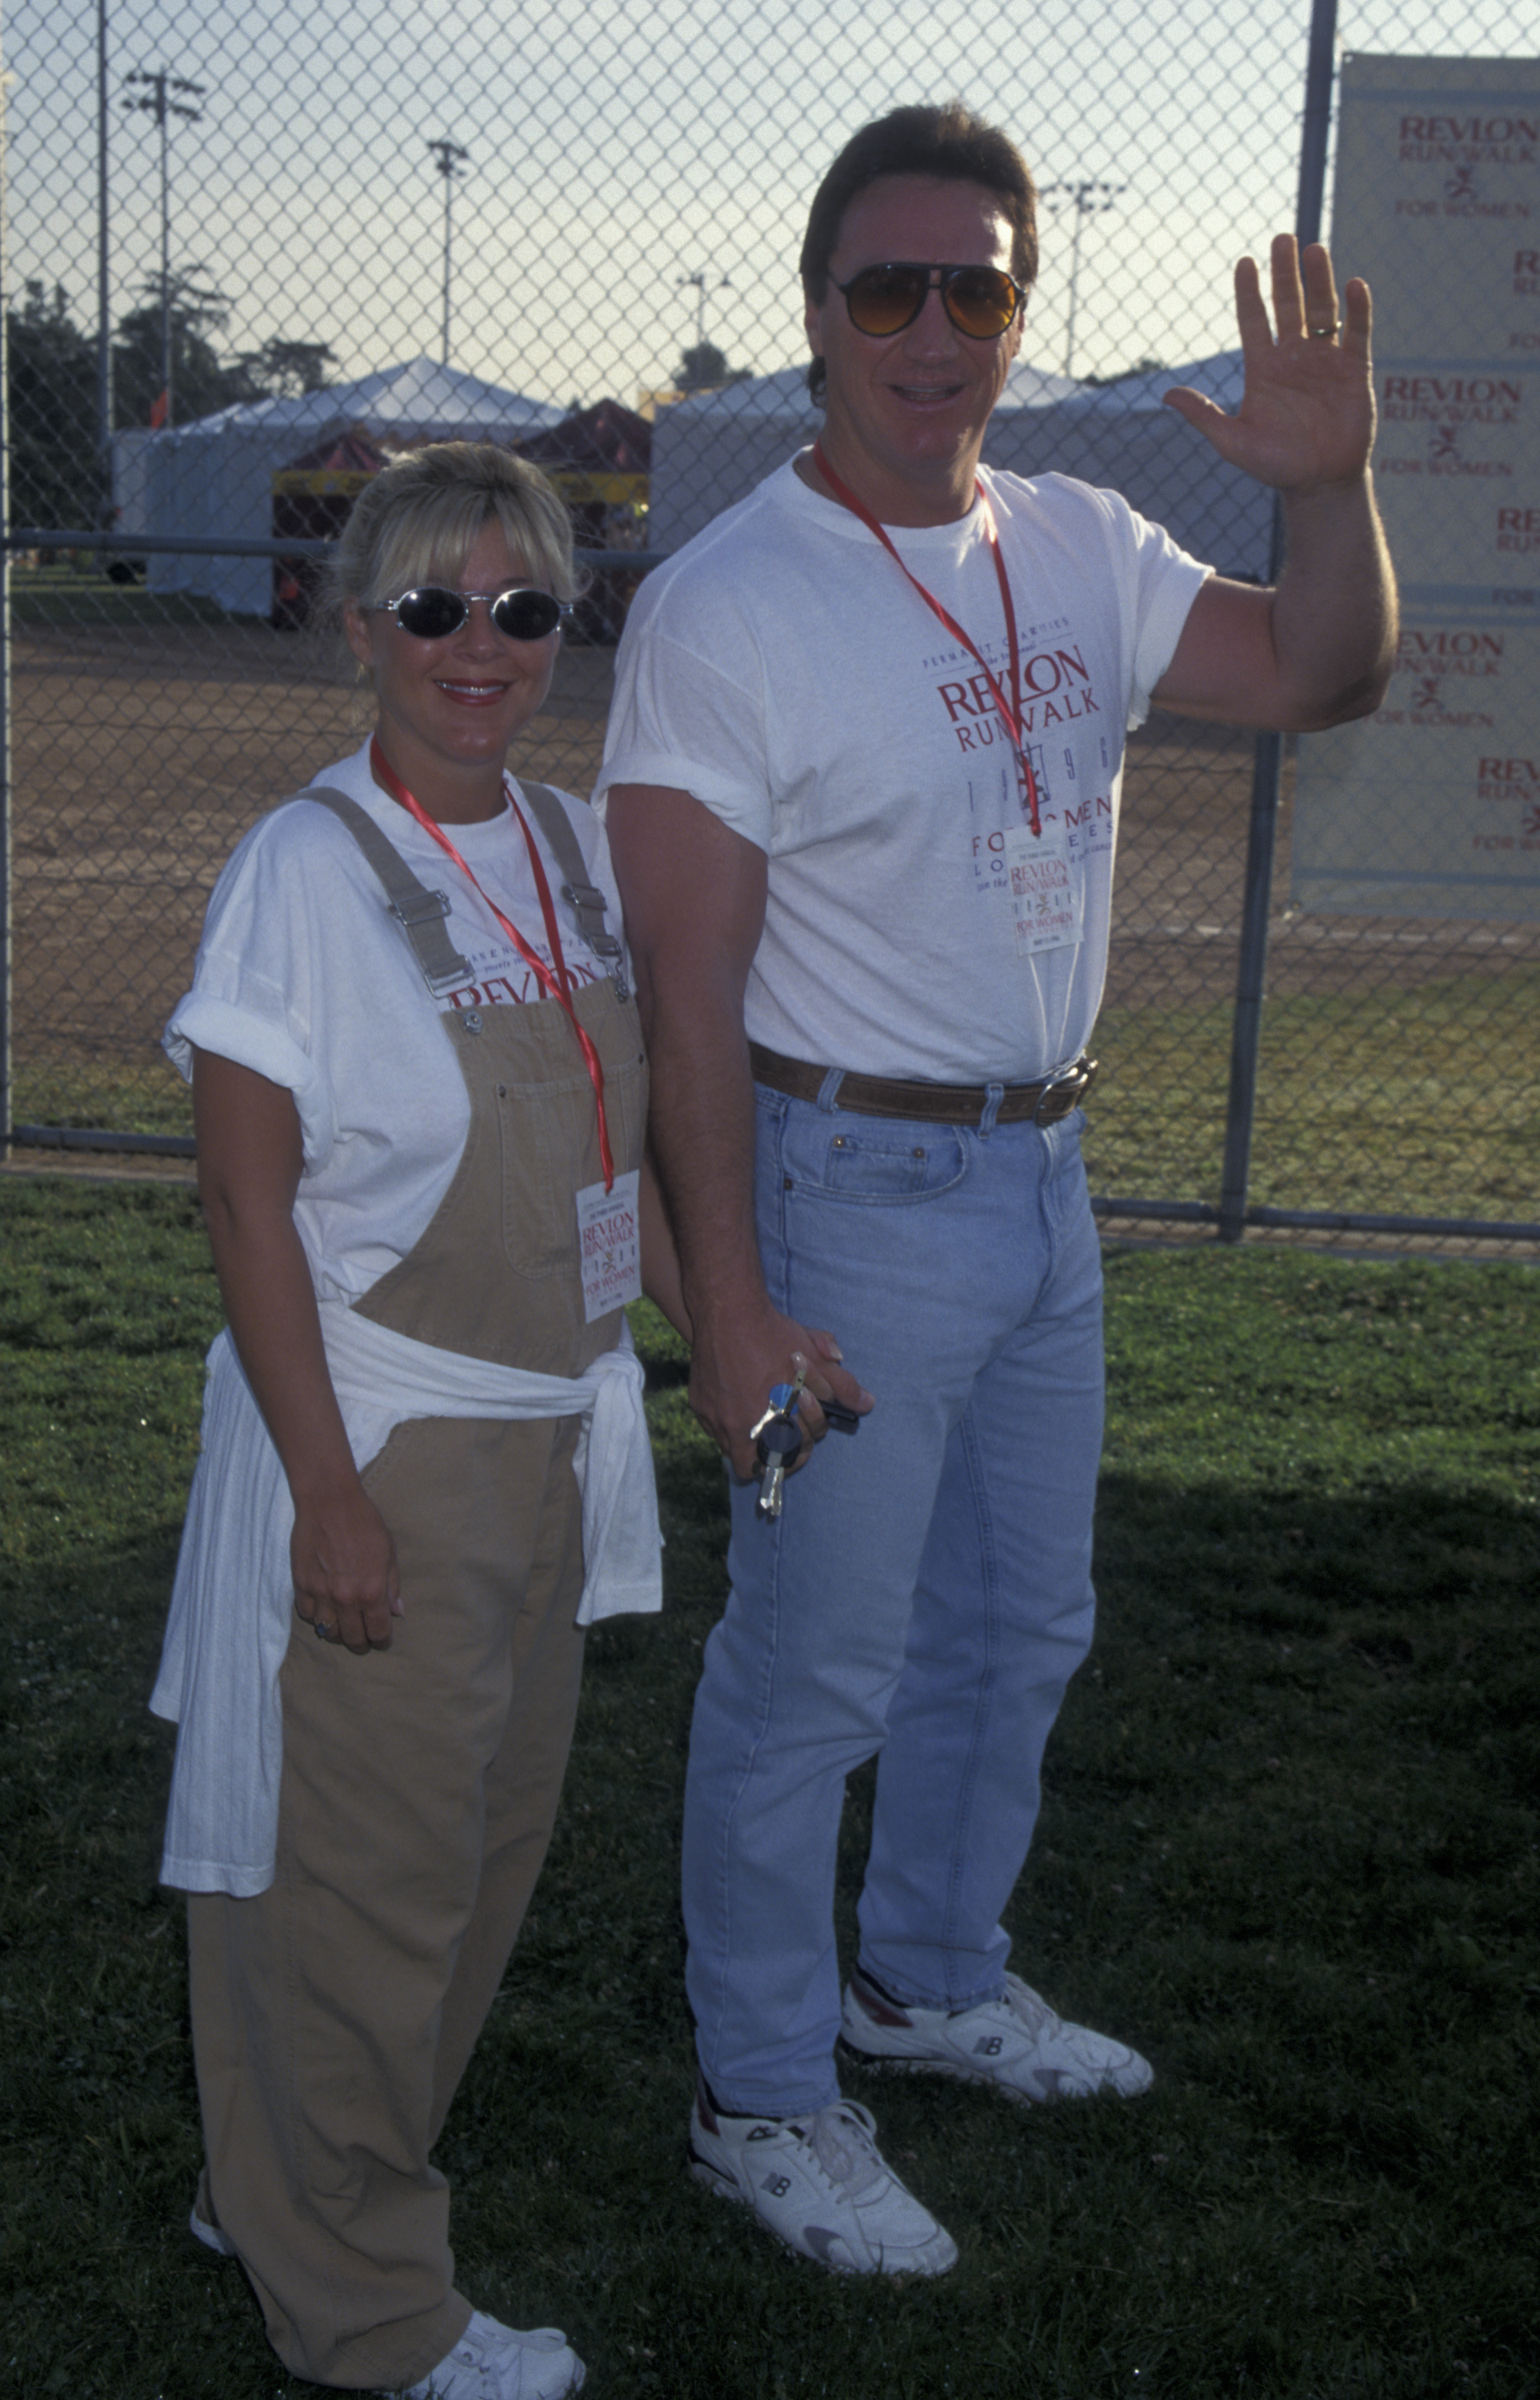 Alan Autry and Kimberlee Autry attend Revlon Run-Walk Benefit at Cheviot Hills Park on May 11, 1996, in Century City, California. | Source: Getty Images